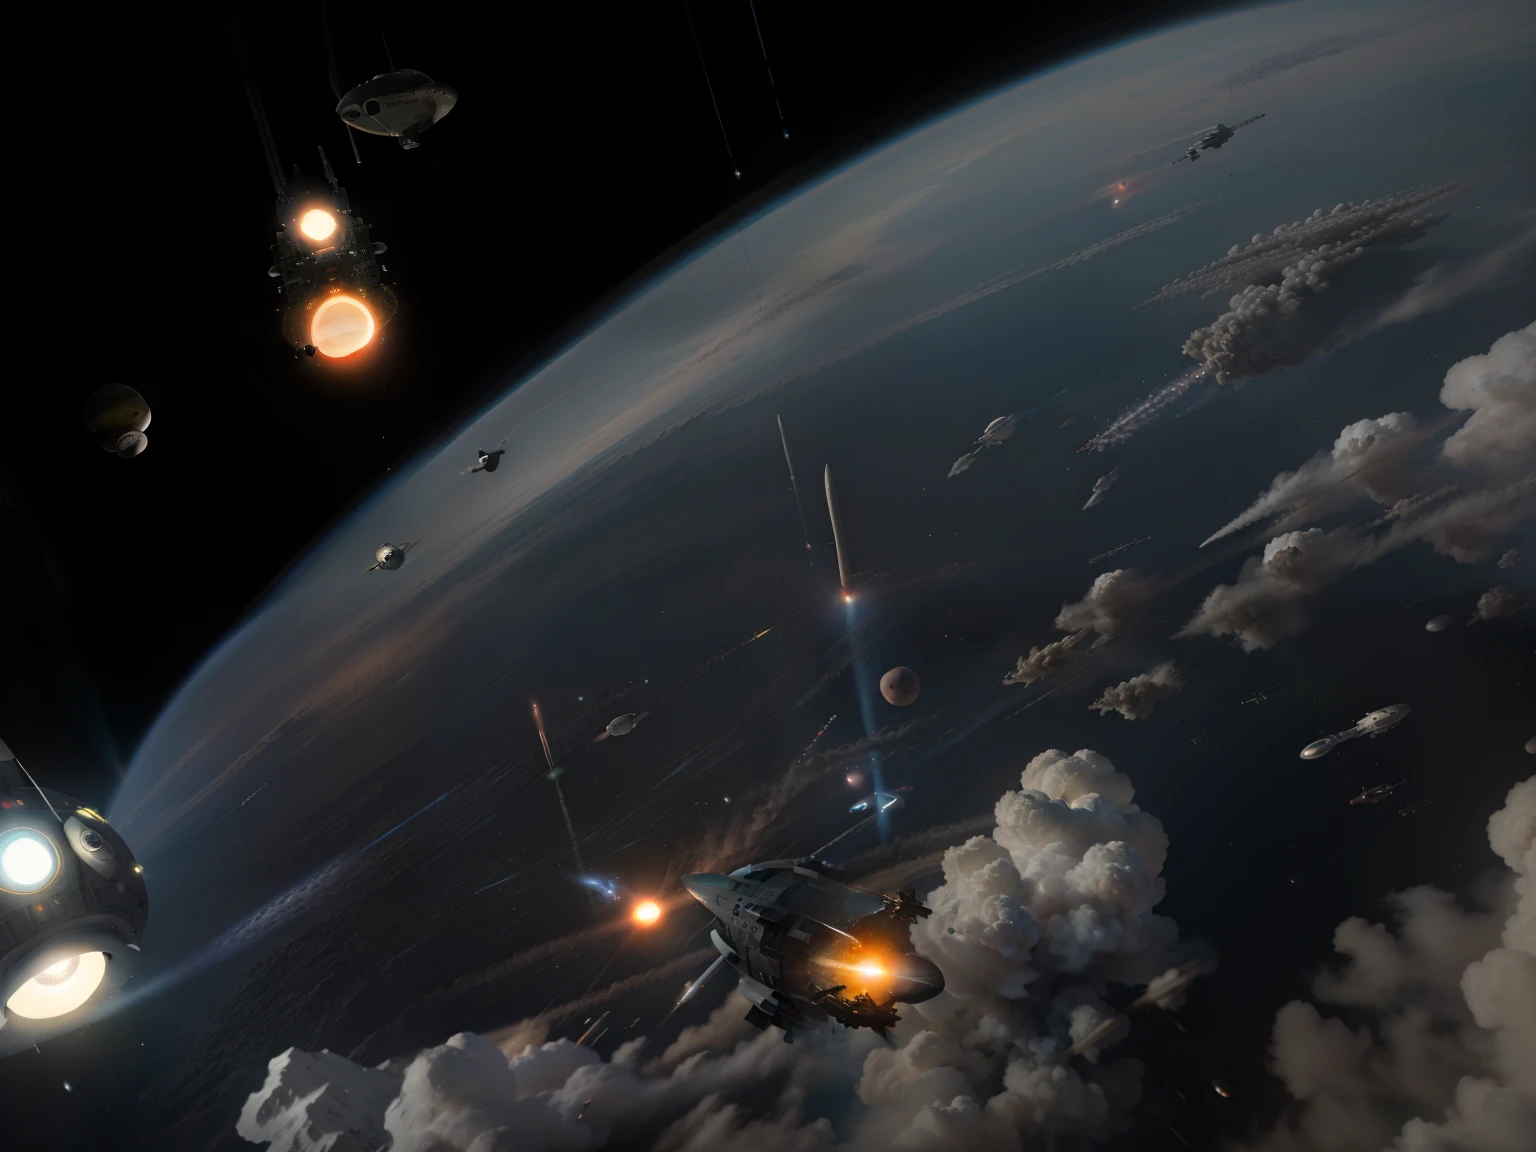 orbital drop, orbital bombardment, pods falling to a planet, (Starships dropping pods to a planet surface), planet being invaded with pods, nuclear explosions on a planet's surface, photo realistic, hyper realistic, futuristic invasion, starships dropping pods and kinetic weapon fire, streams of weapon fire to the planet, nuclear explosions on the planet